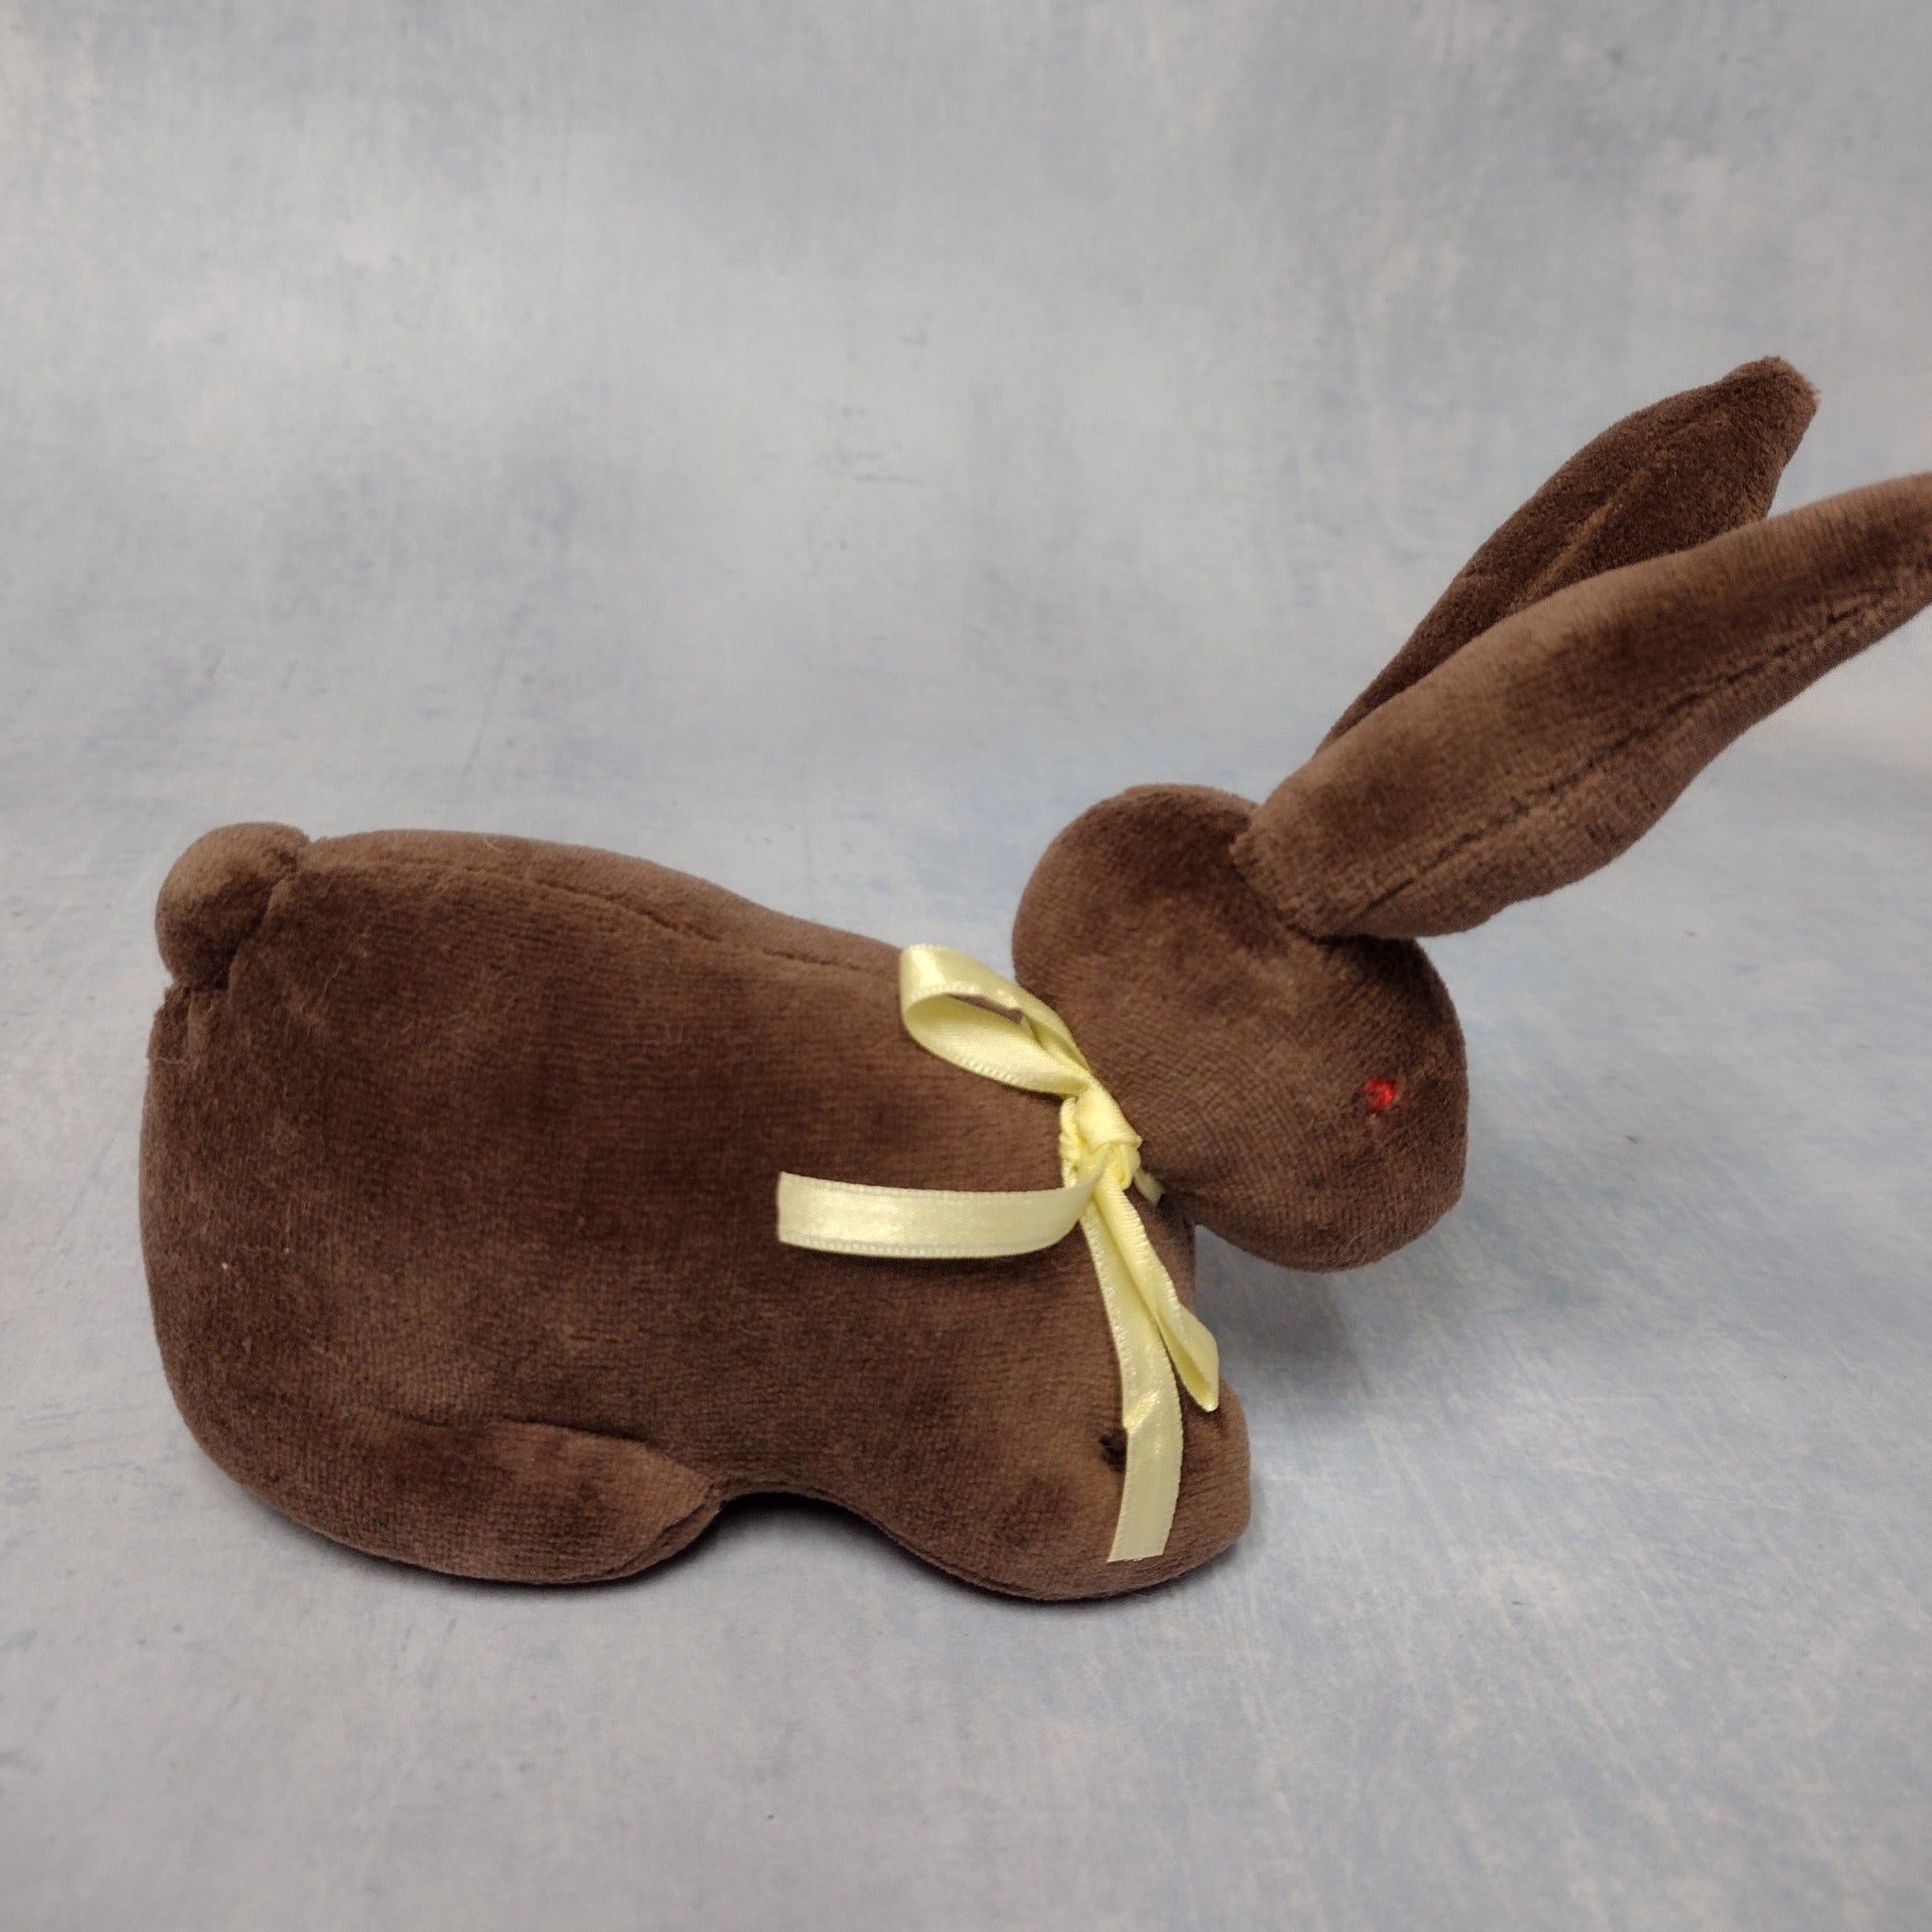 Stuffed Rabbit-Standing or Laying Down